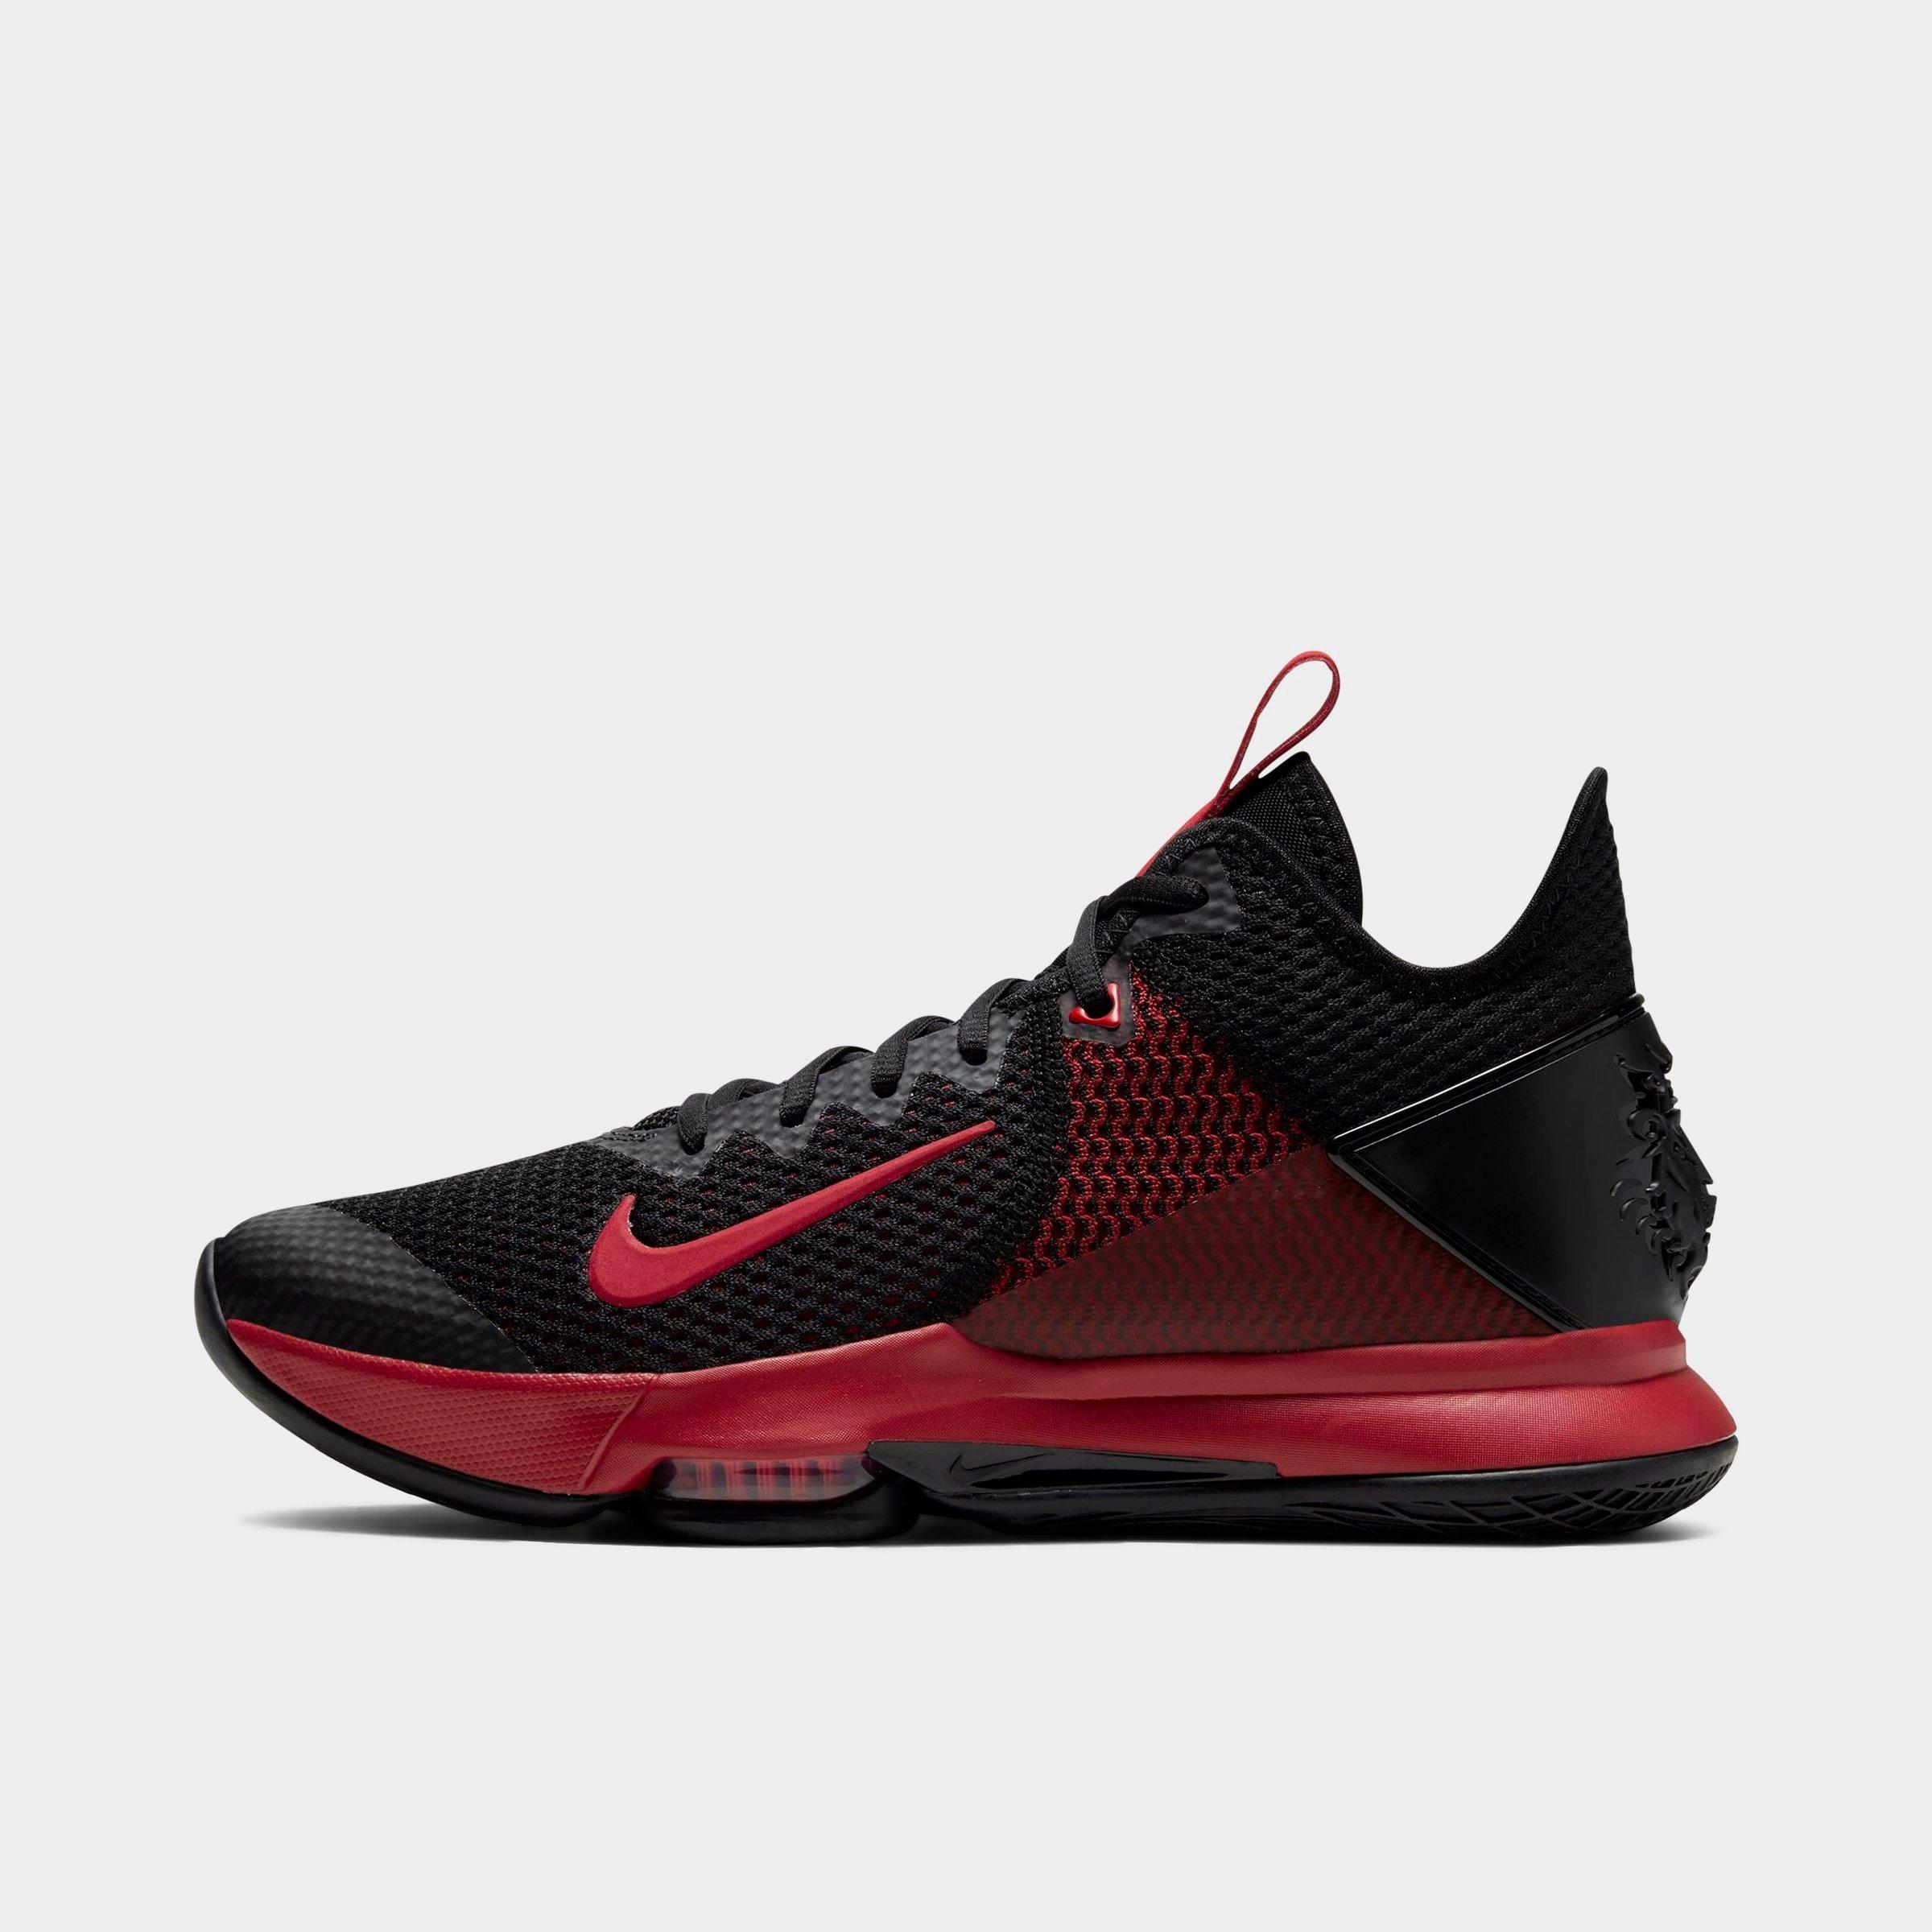 lebron witness iv red